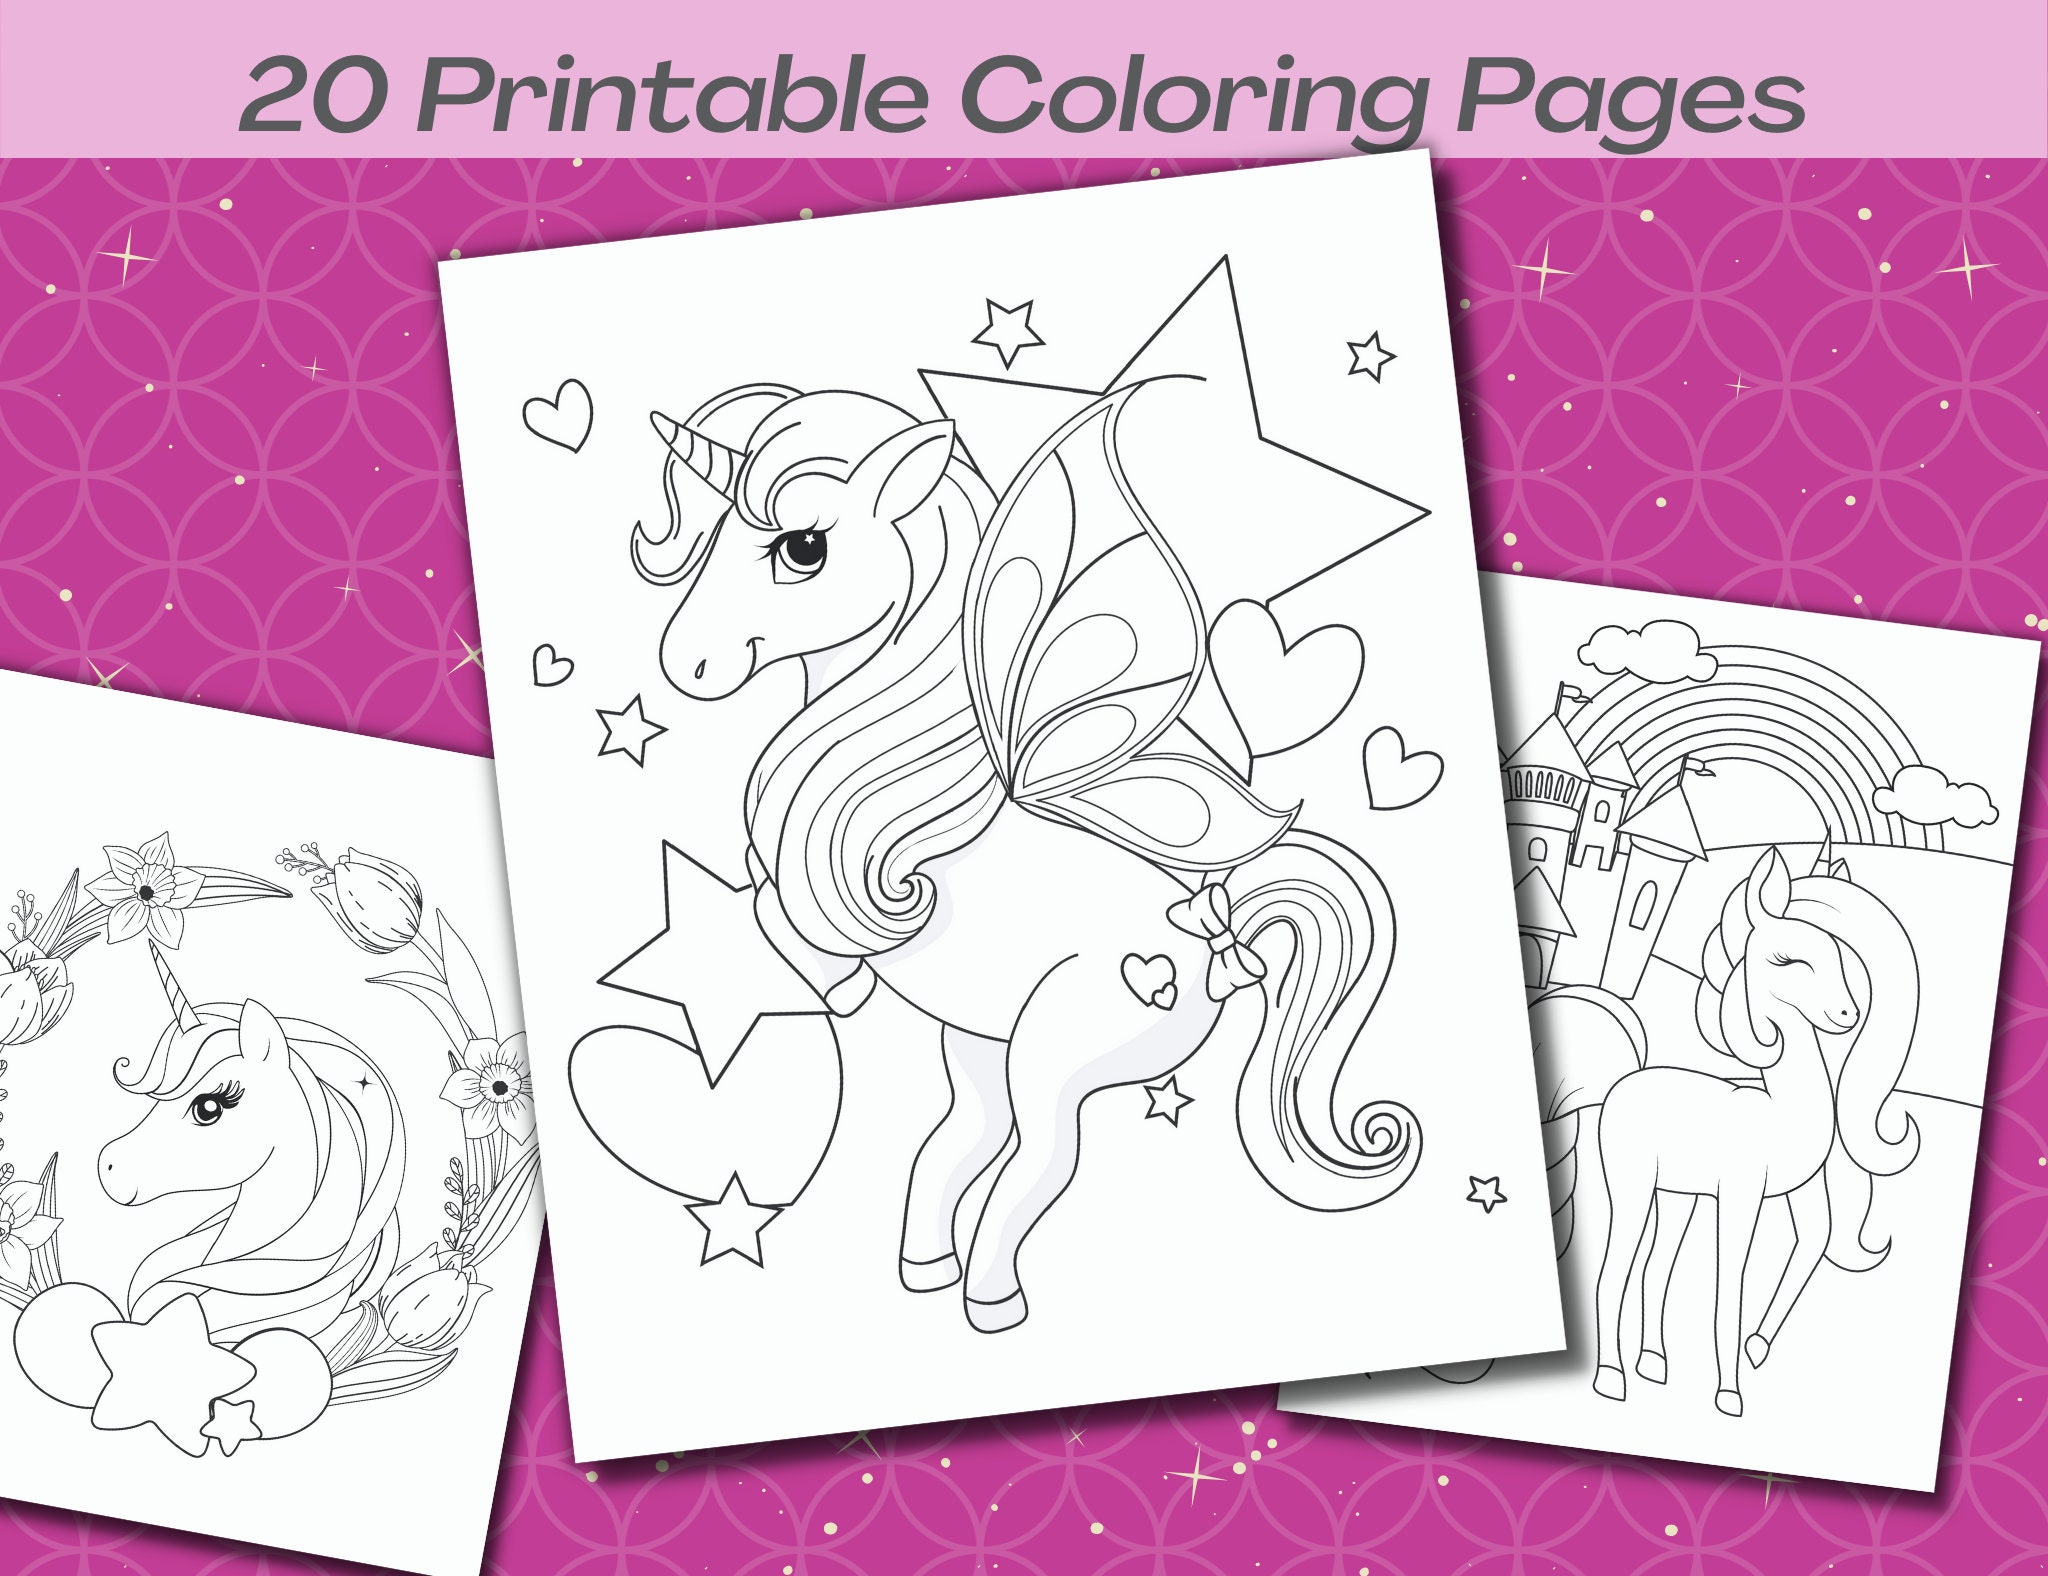 Unicorn Coloring Pages 20 Printable Unicorn Coloring Pages   Etsy ...